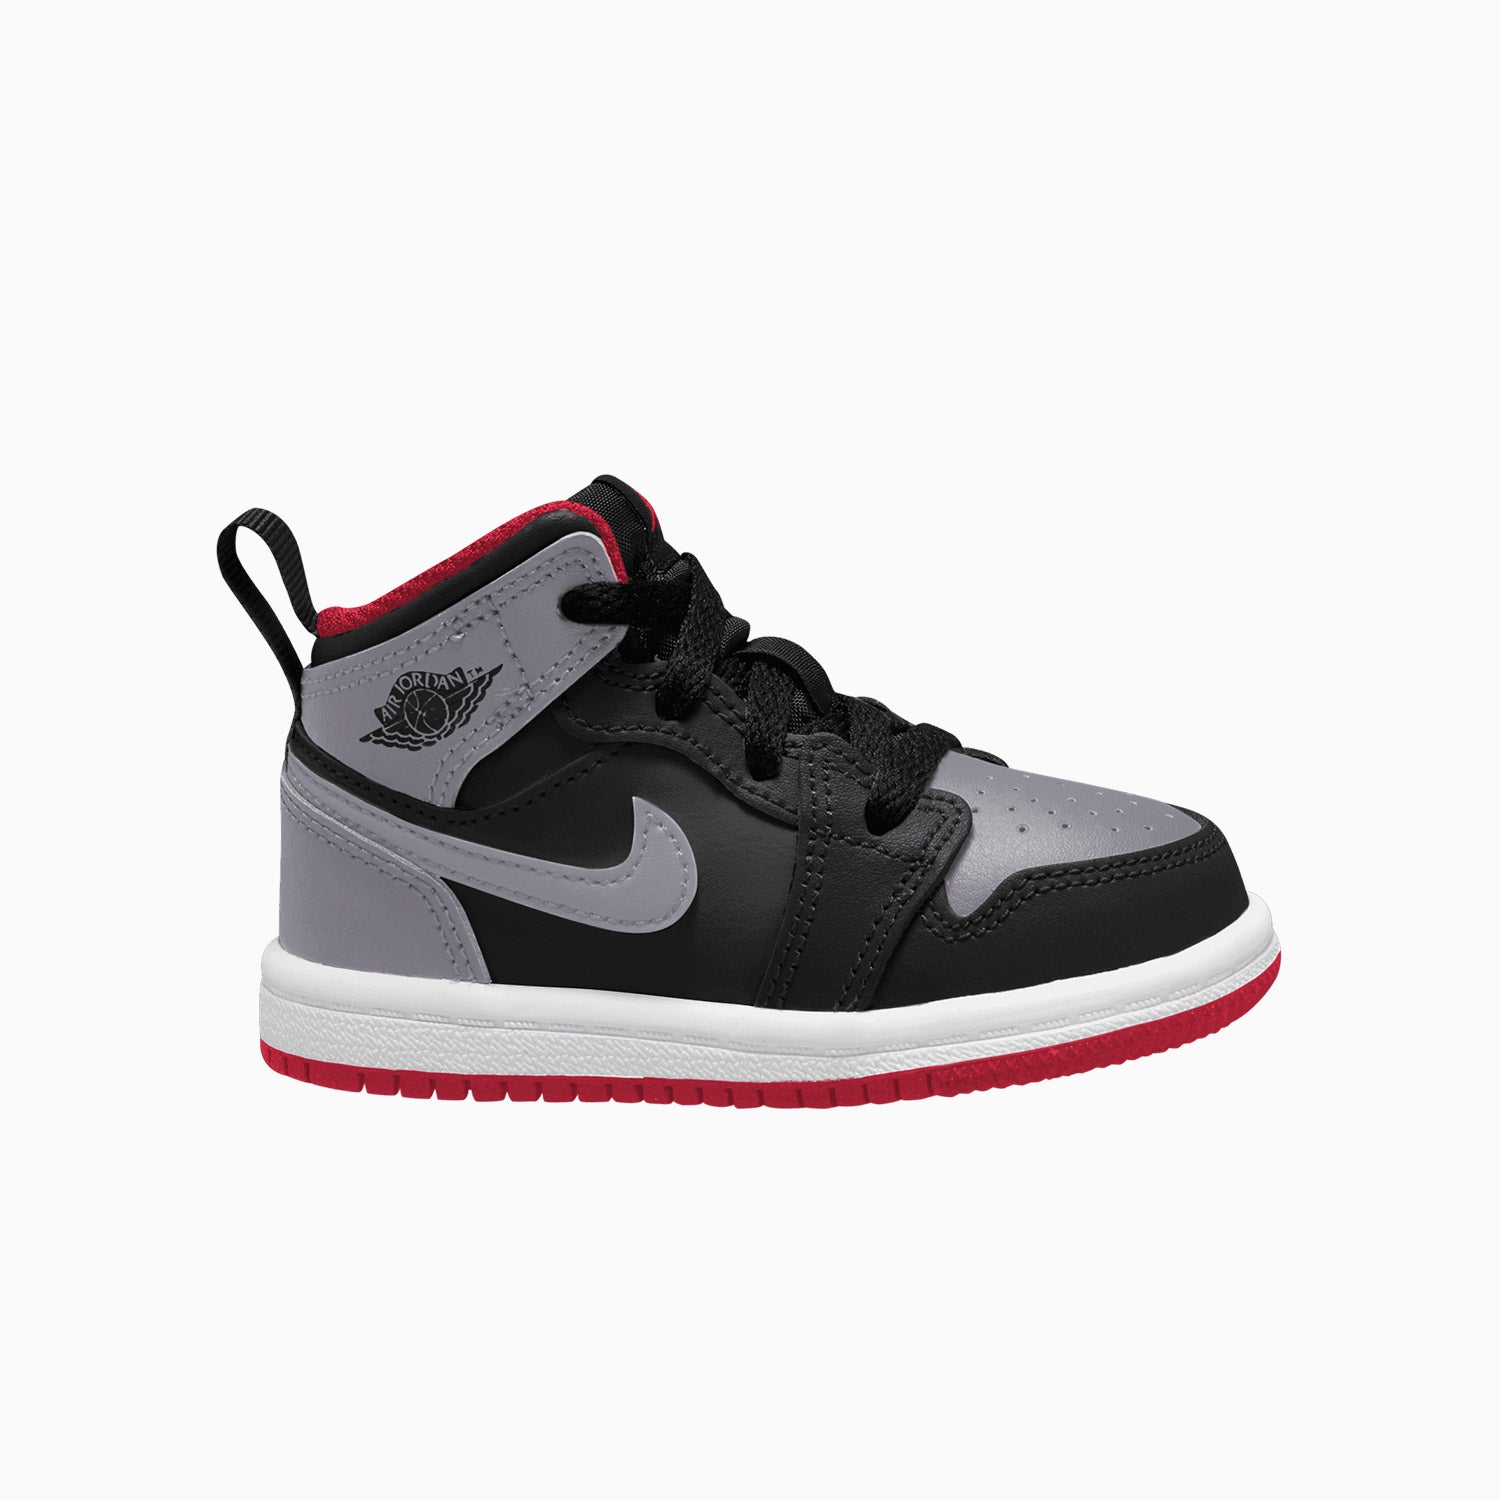 kids-air-jordan-1-mid-cement-grey-toddlers-shoes-dq8425-006